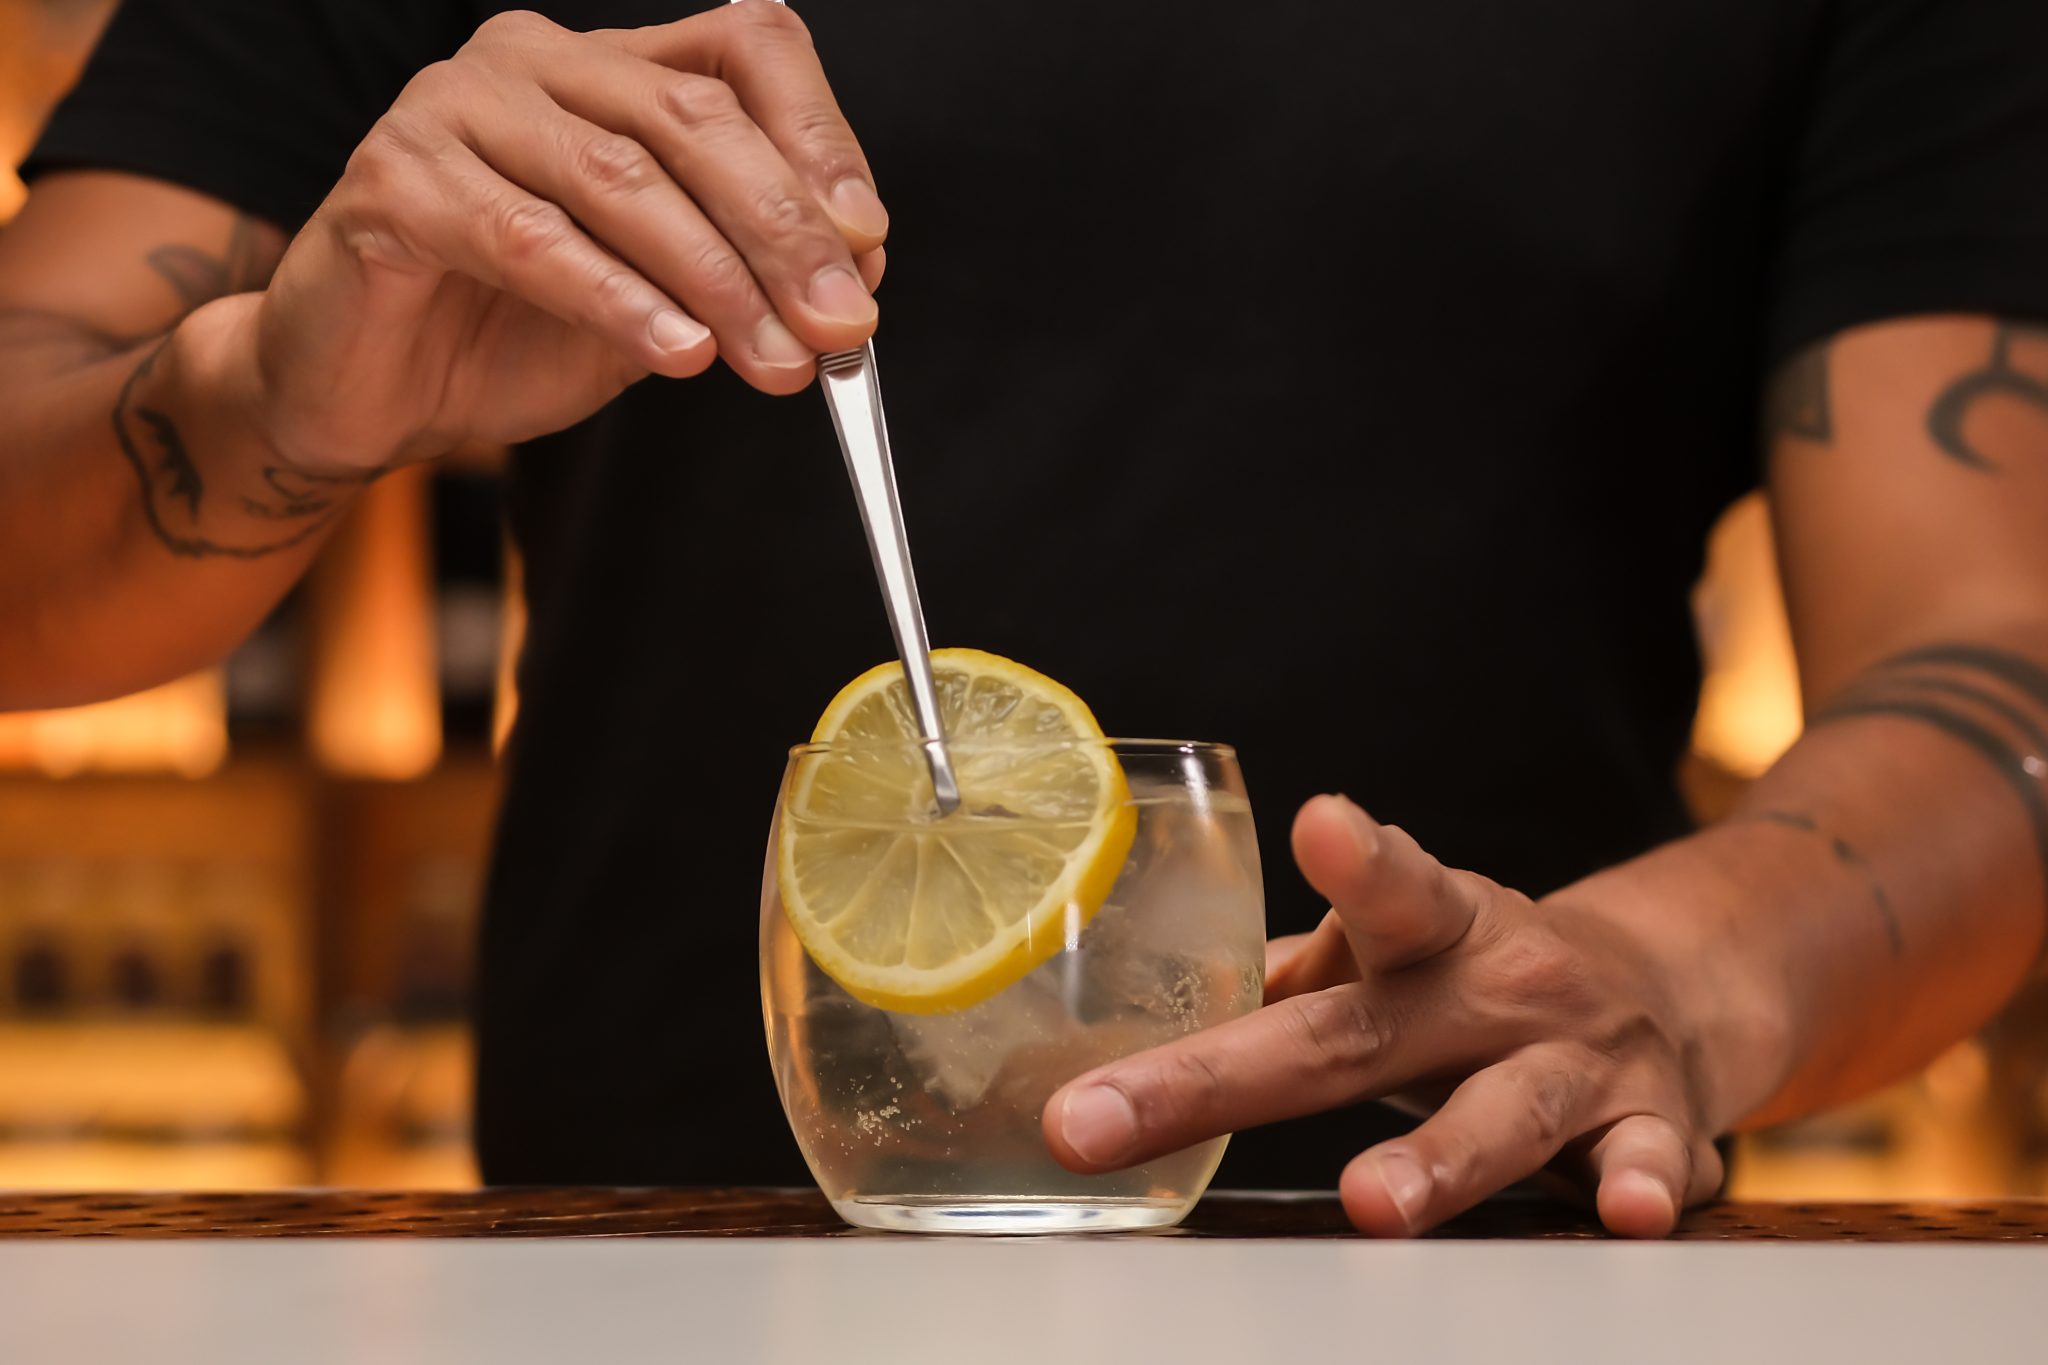 <p>For a finishing touch, garnish the drink first with a lemon slice or twist.</p>
